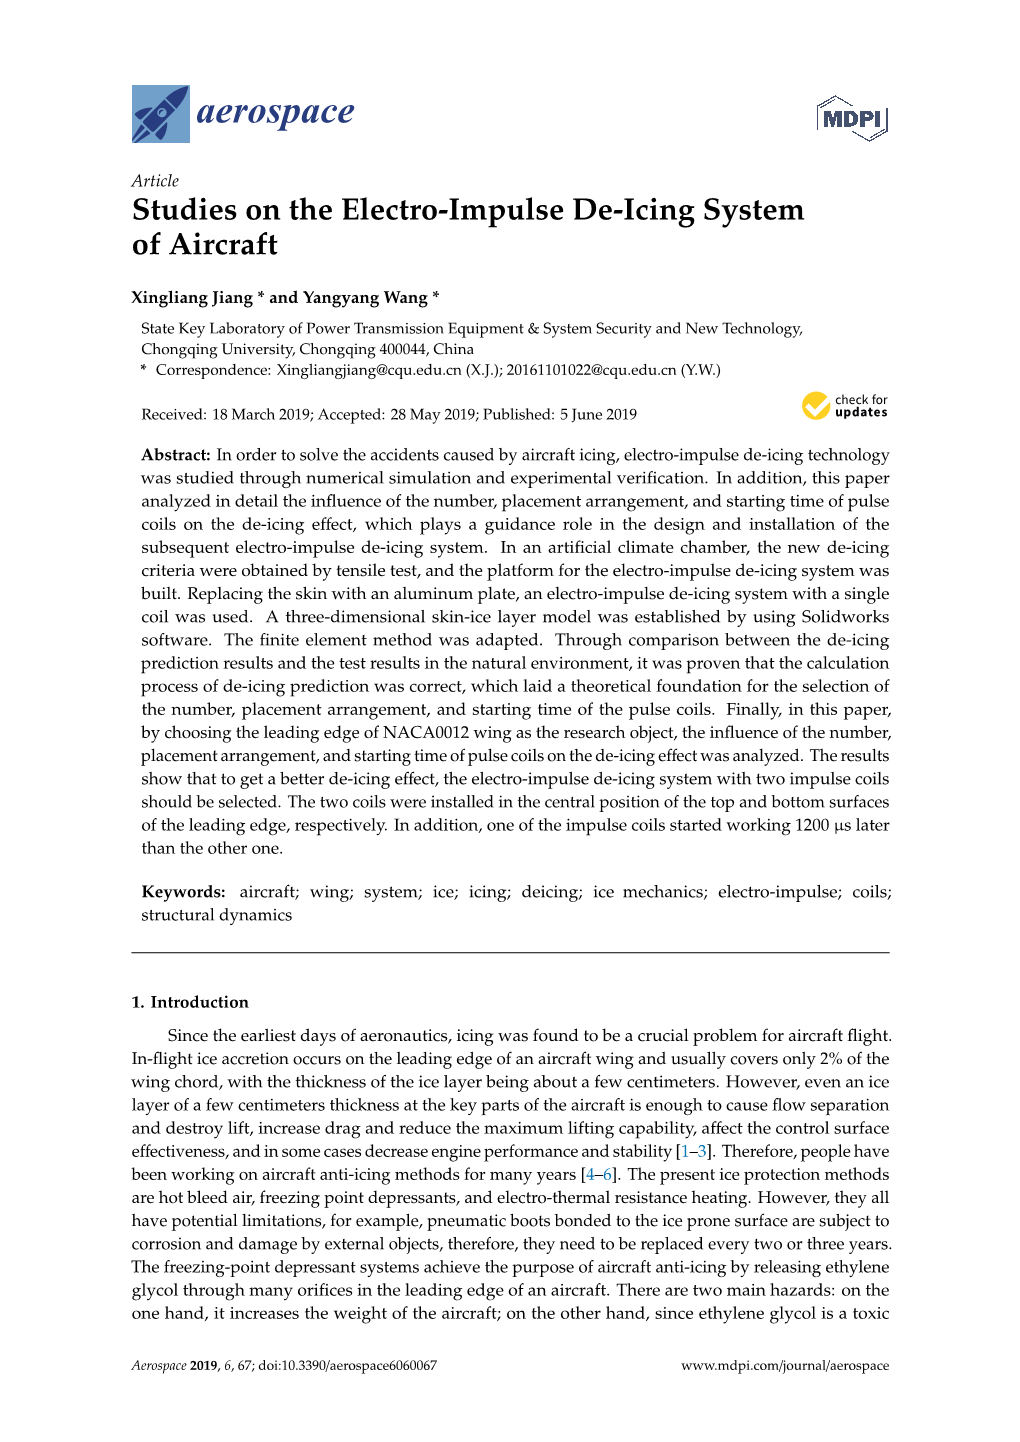 Studies on the Electro-Impulse De-Icing System of Aircraft